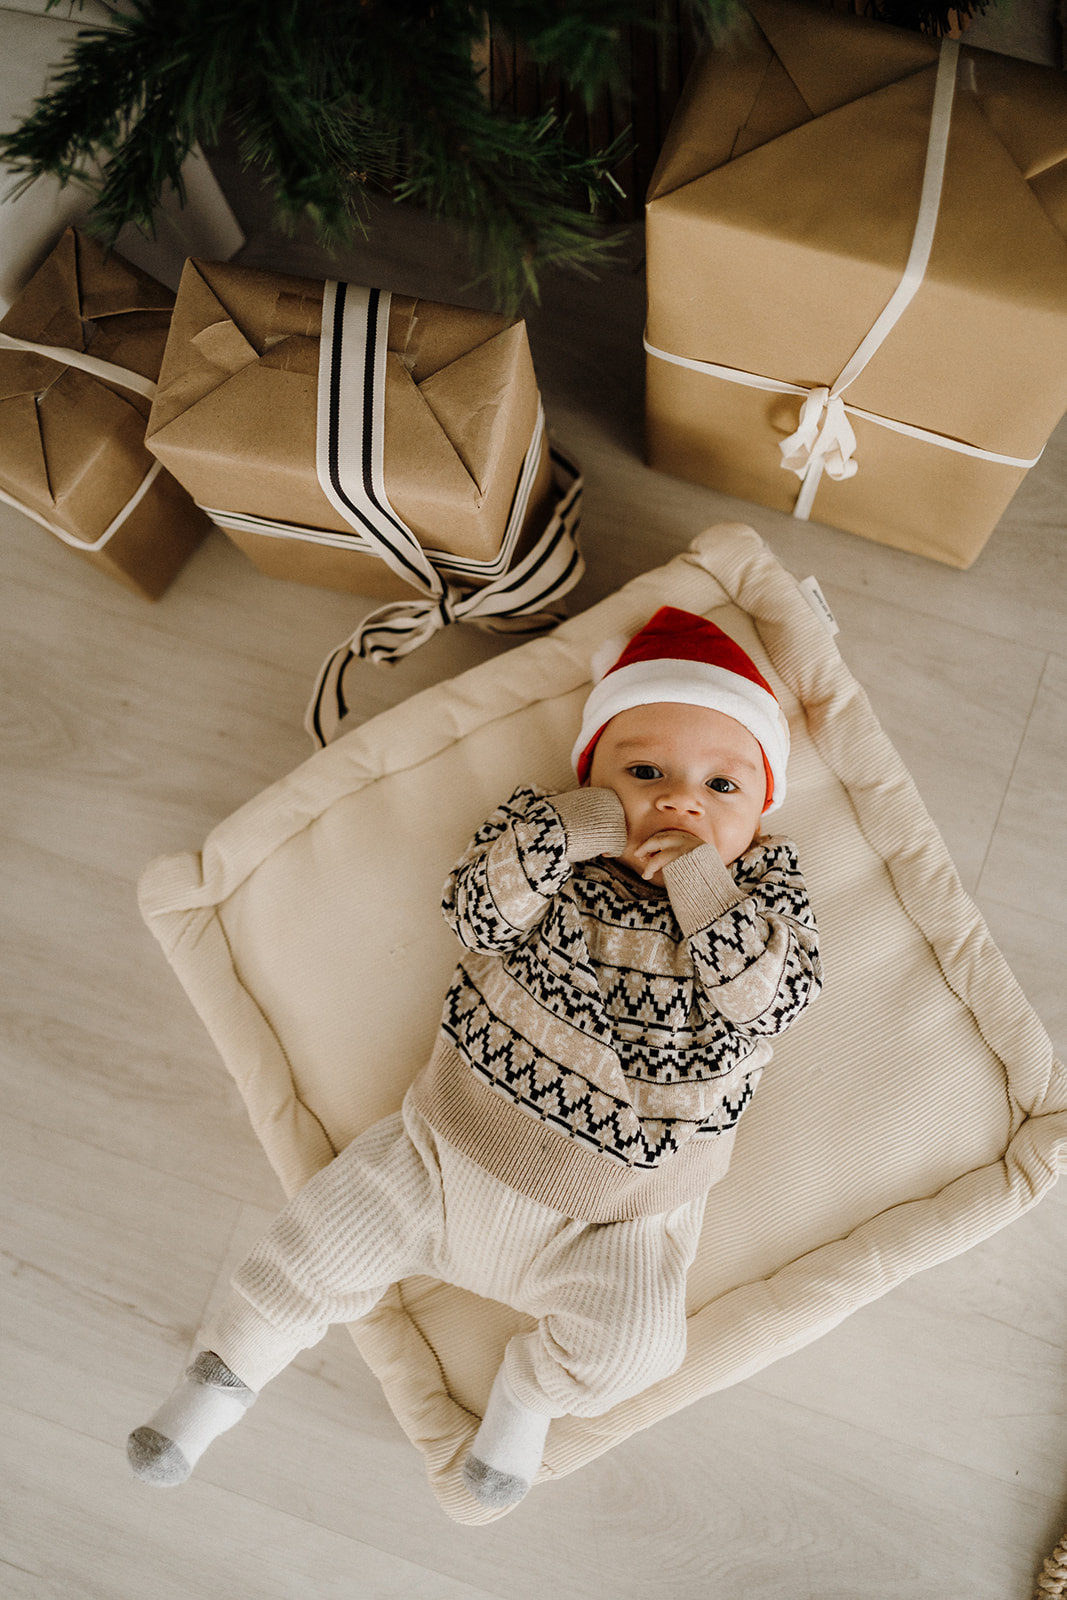 Baby lying down on a blanket beside presents.